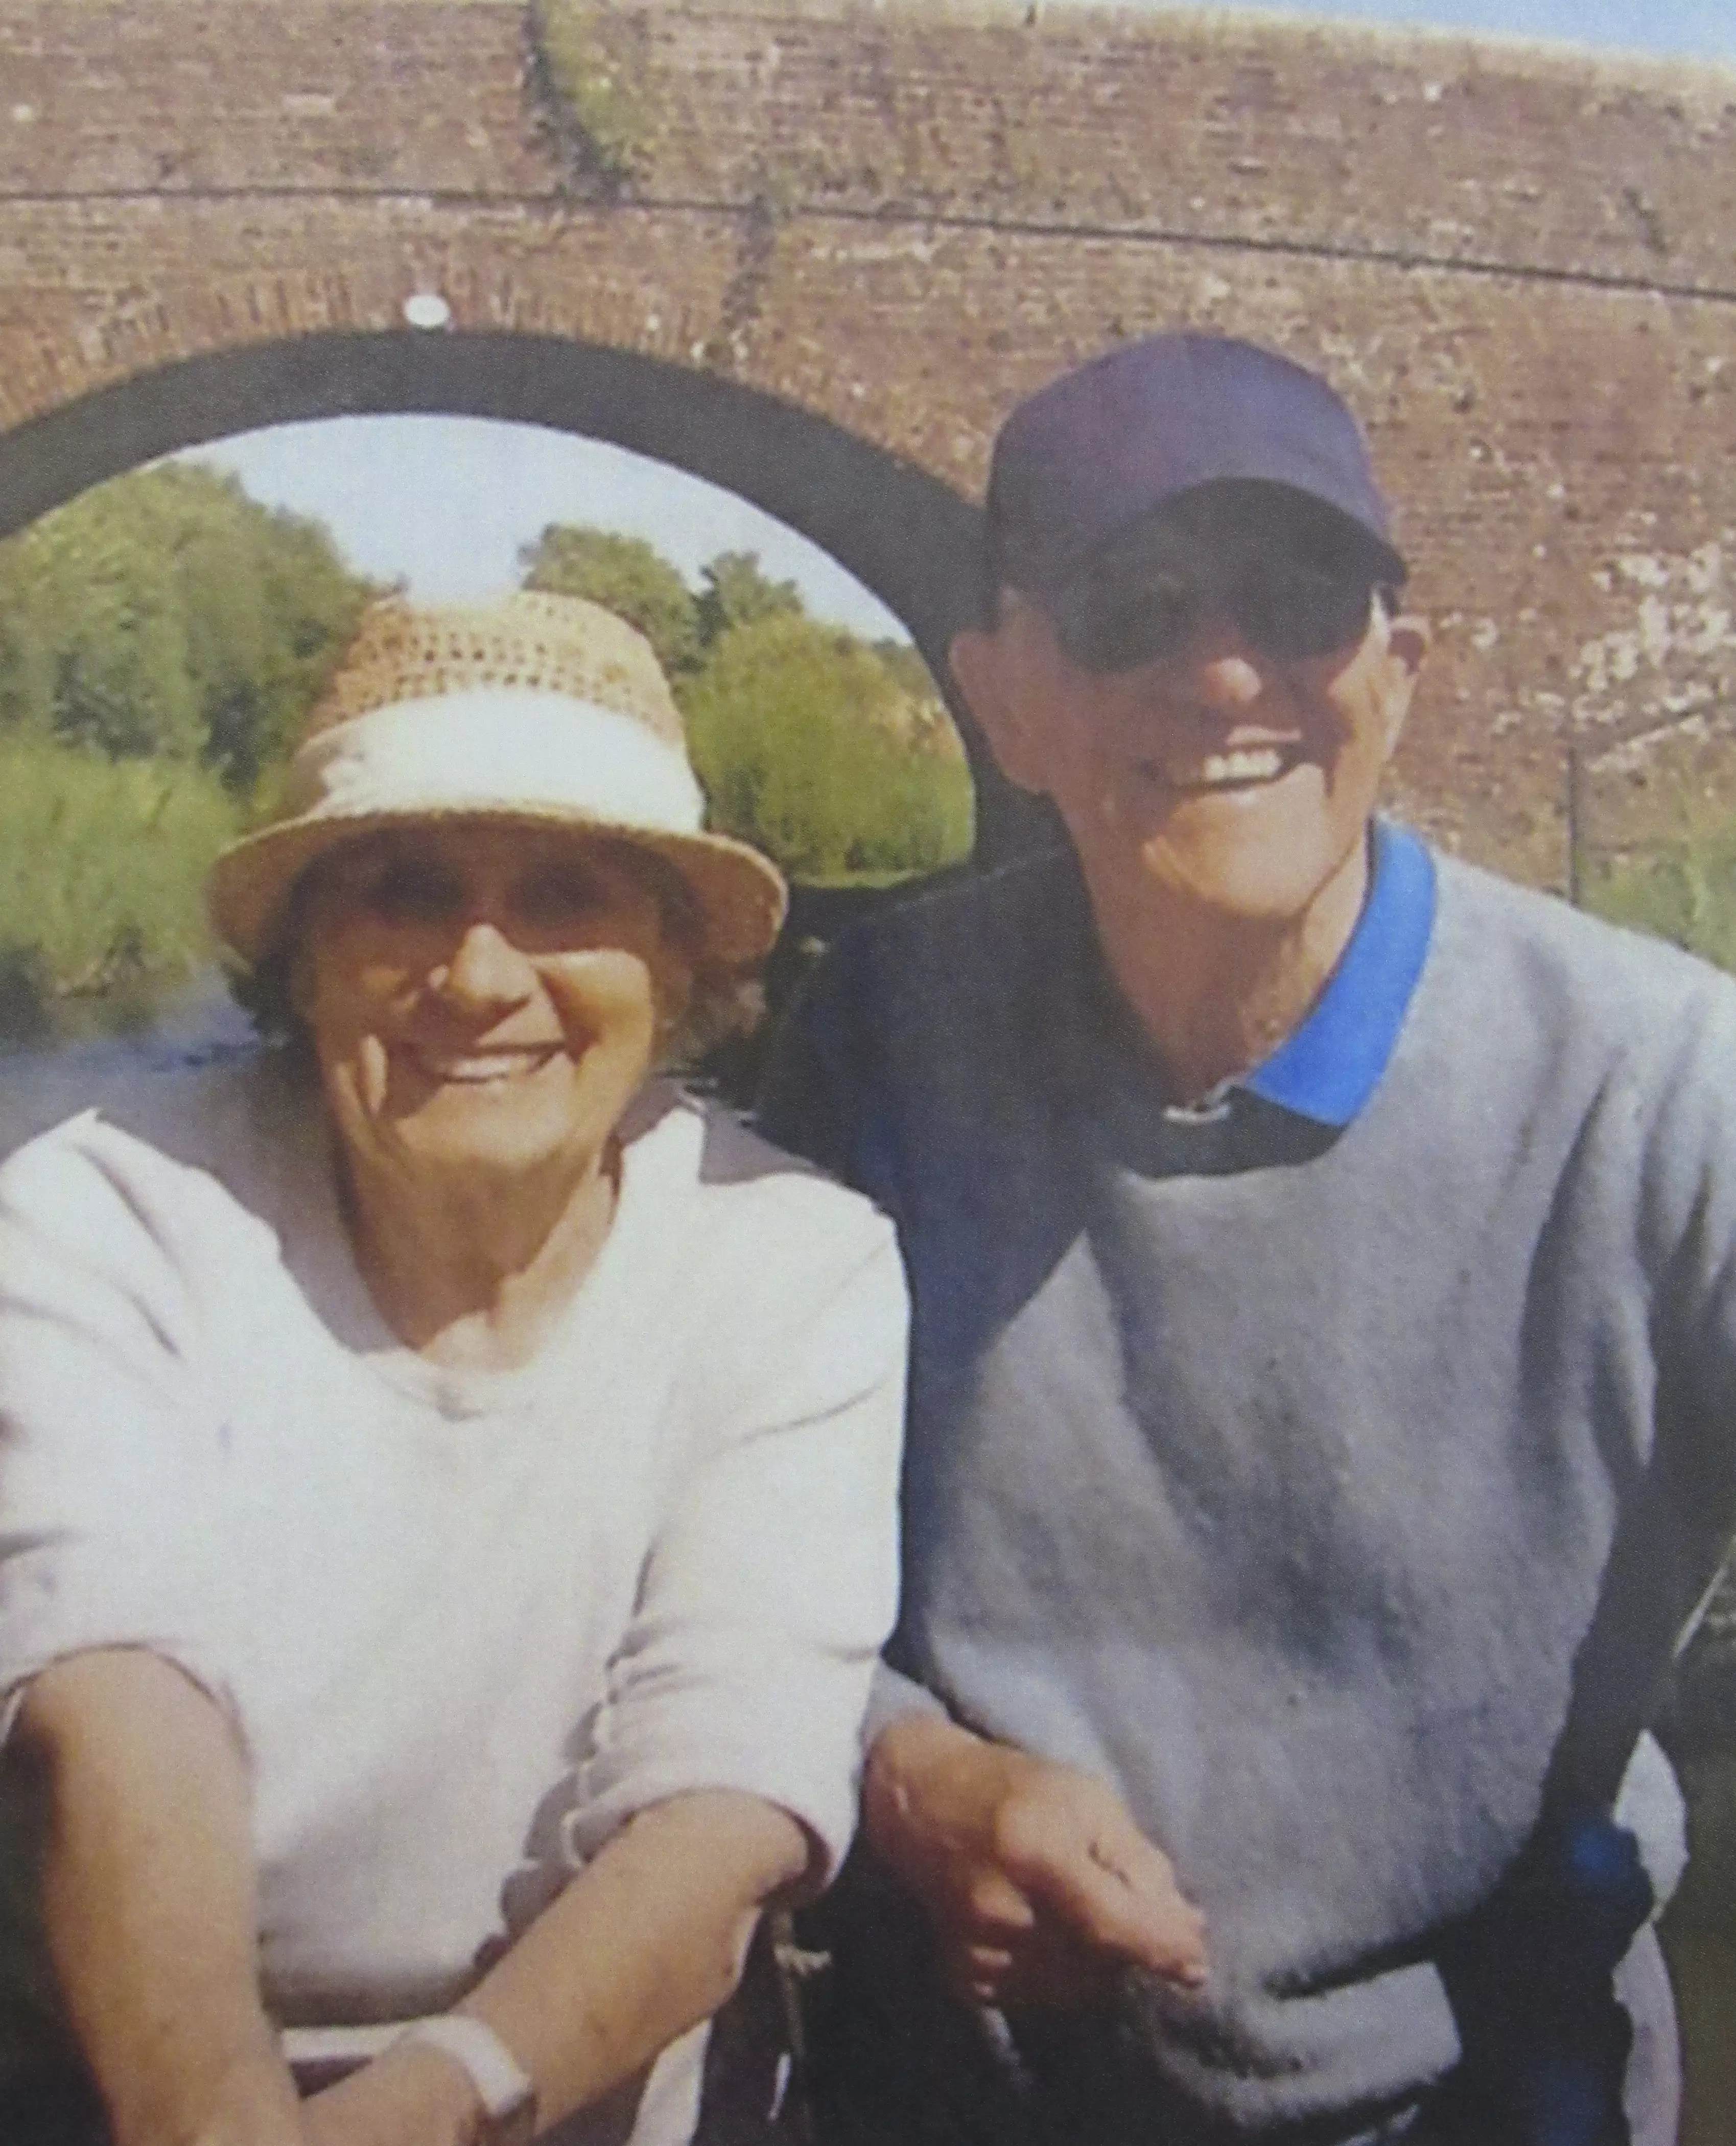 The pair have been together for 26 years, and decided to marry in a care home (